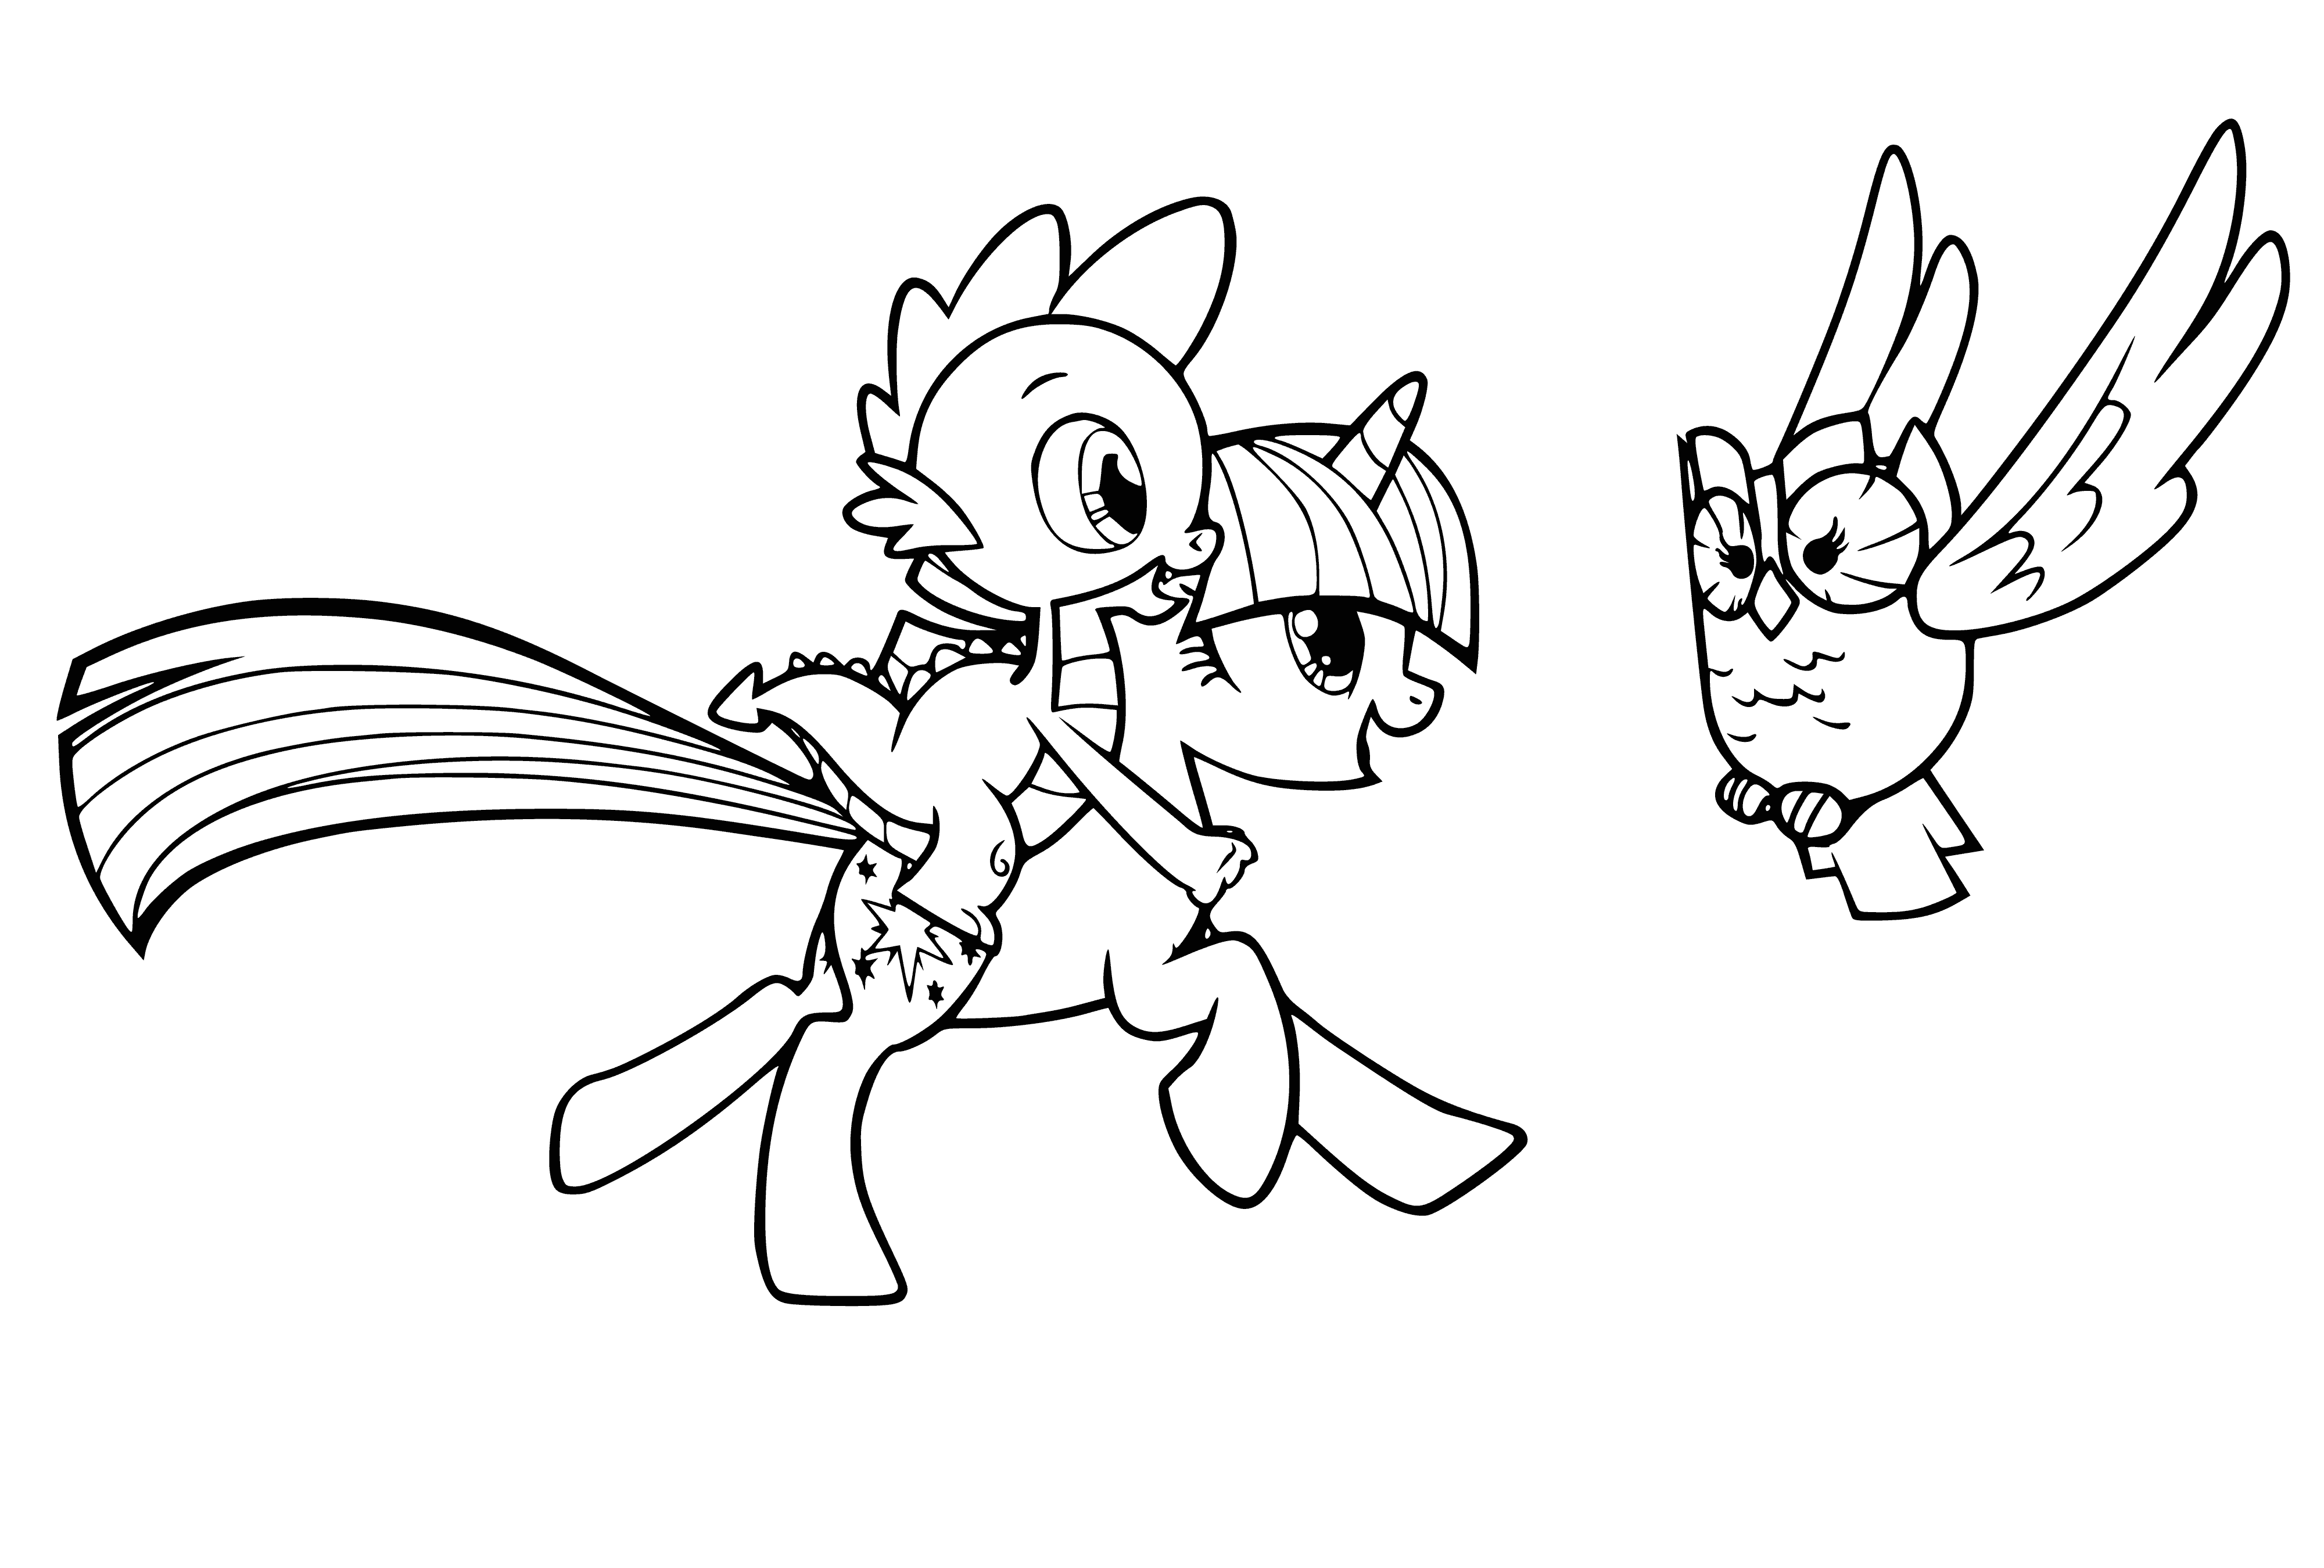 coloring page: Twilight Sparkle rides on Spike, both smiling happily.